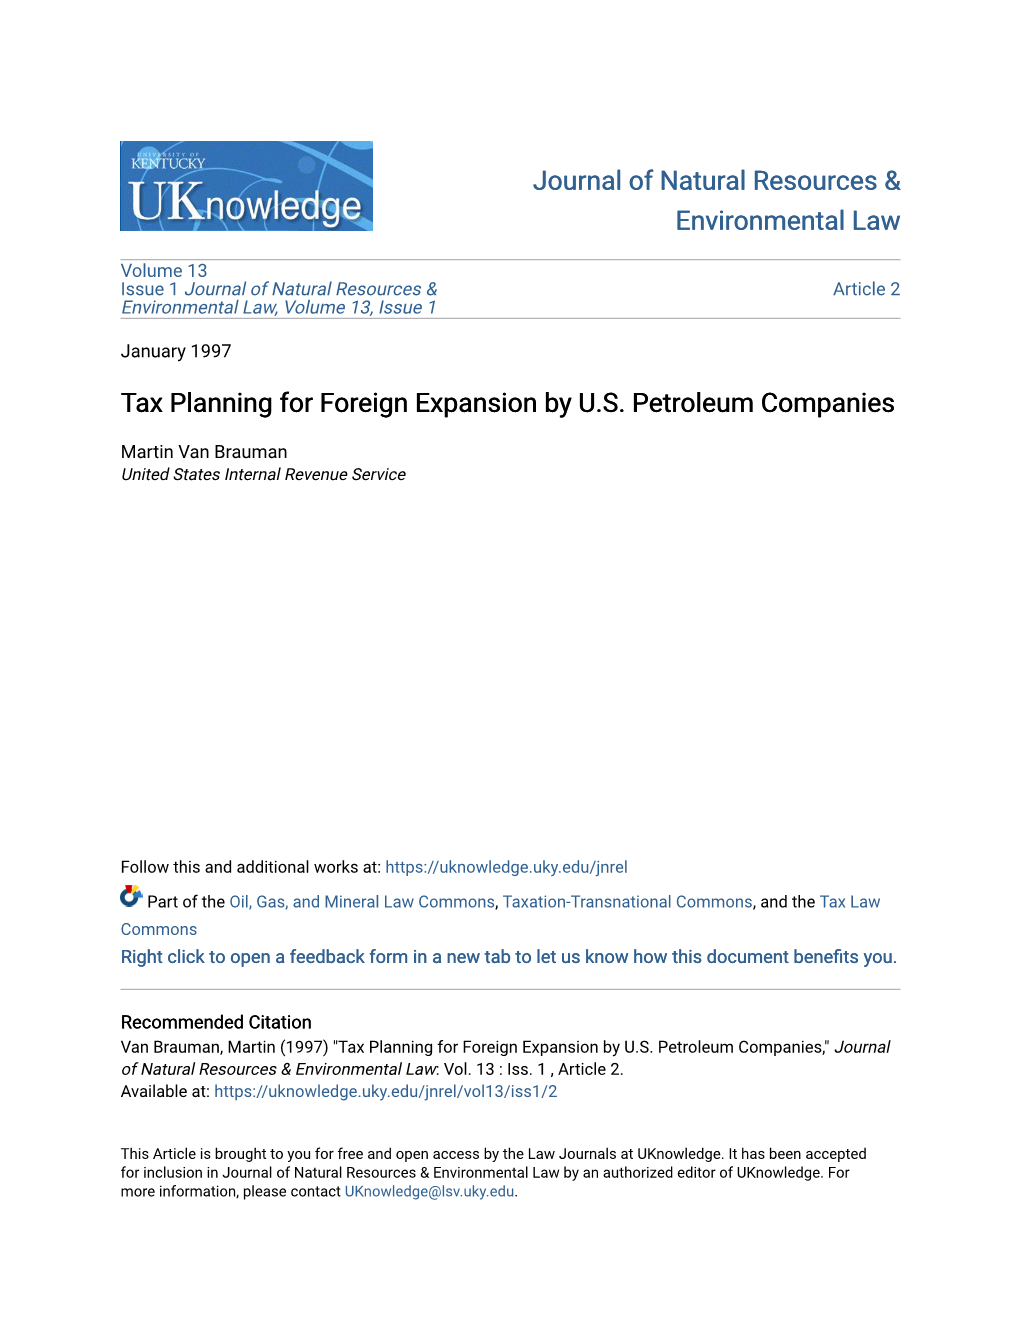 Tax Planning for Foreign Expansion by U.S. Petroleum Companies